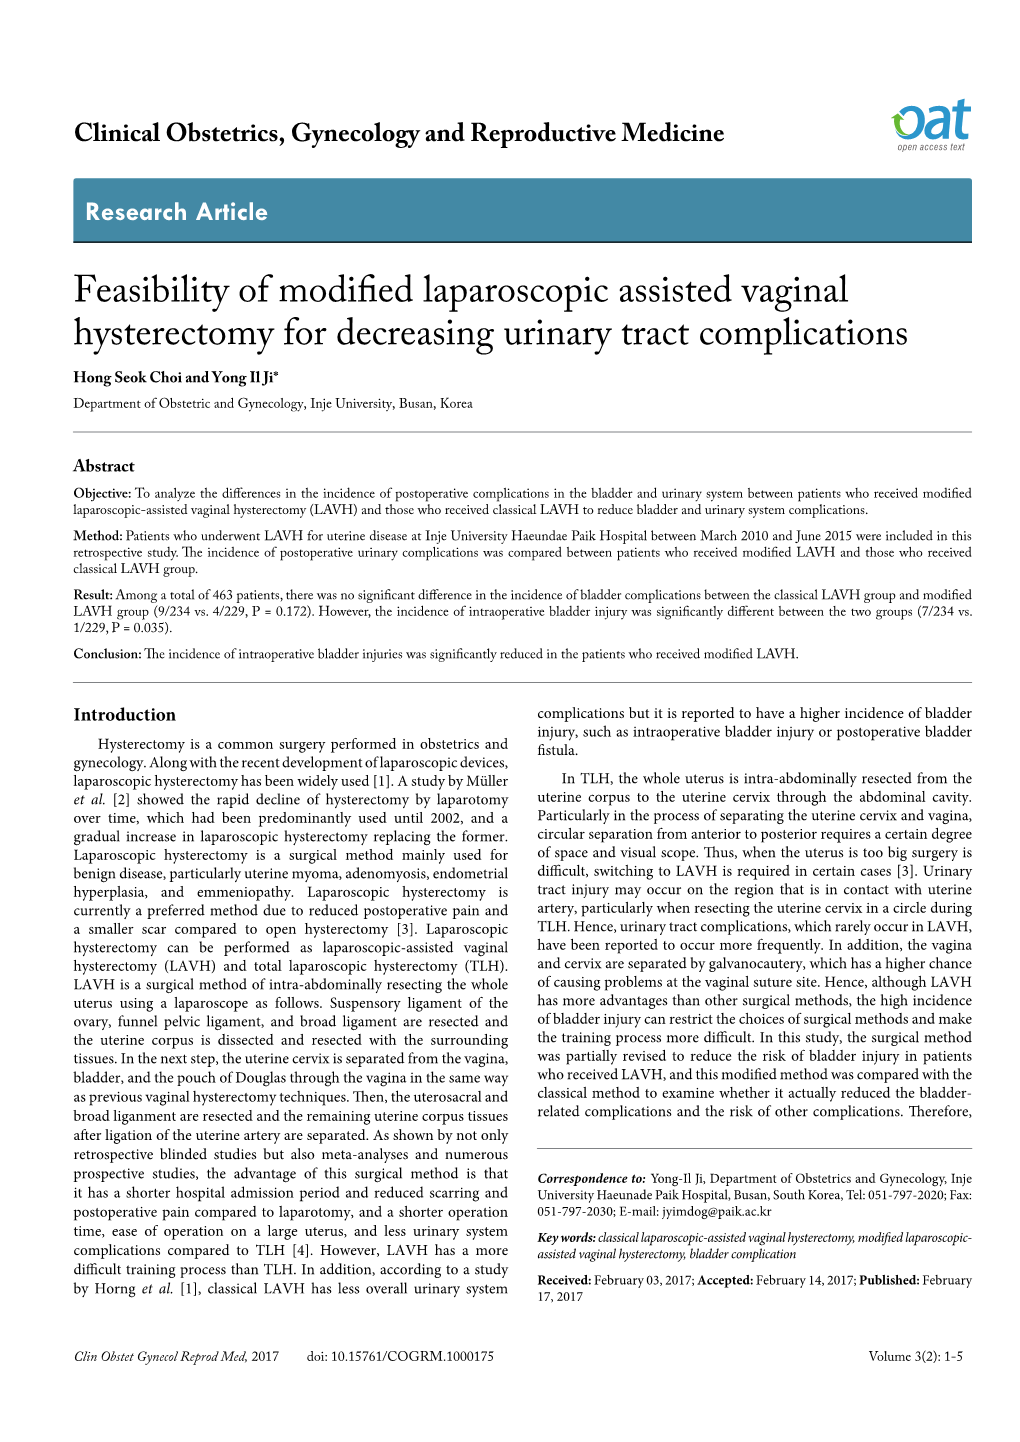 Feasibility of Modified Laparoscopic Assisted Vaginal Hysterectomy For